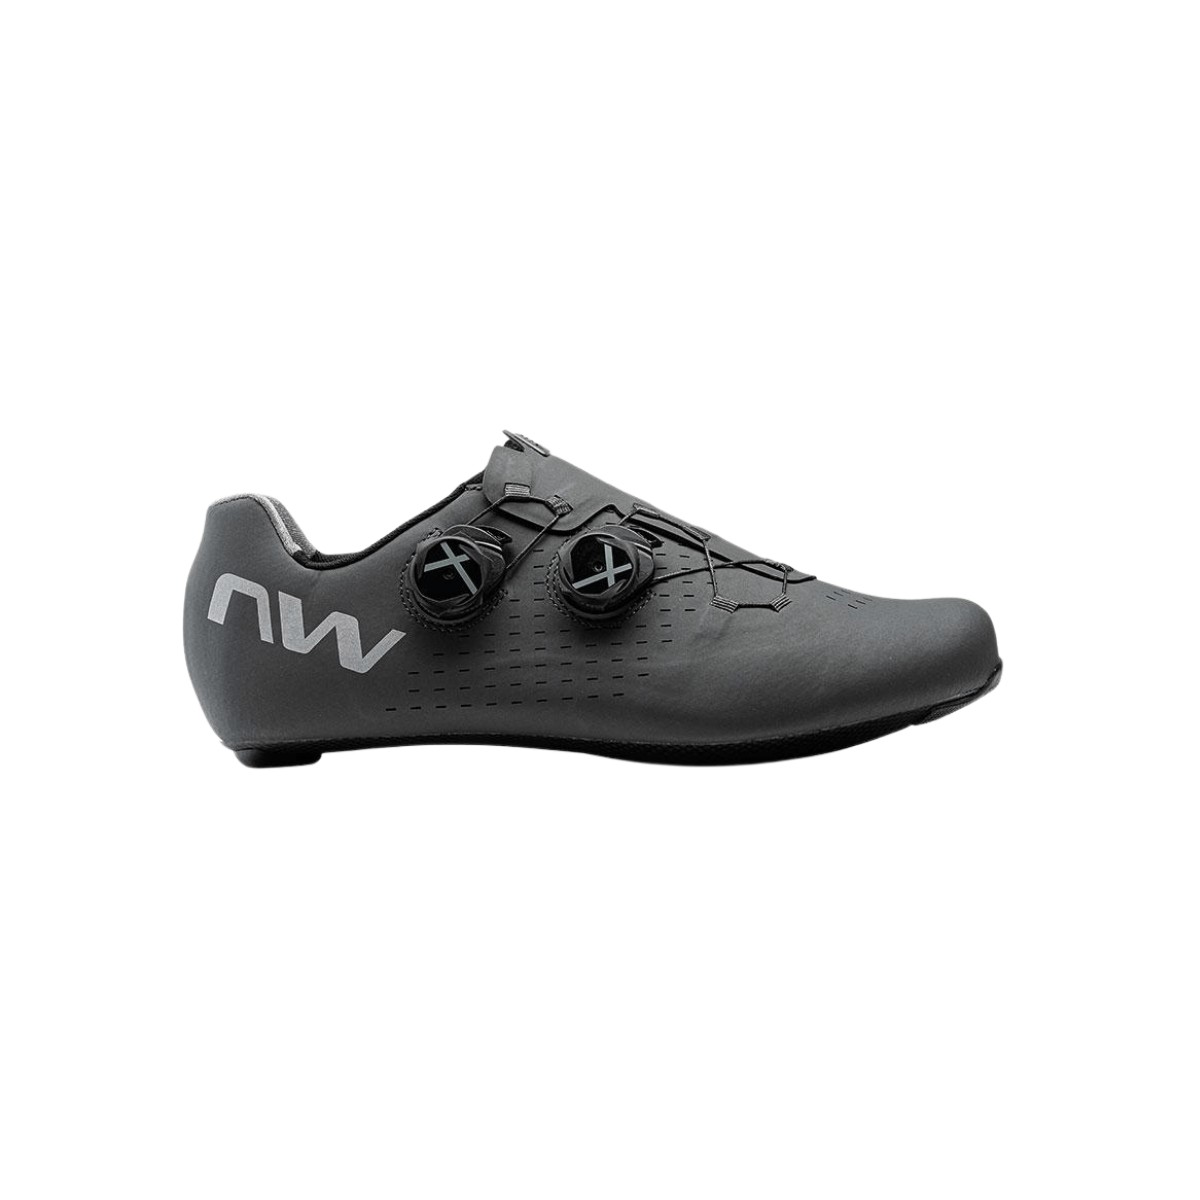 Chaussures Northwave Extreme Pro 2 Noir Blanc, Taille 42 - EUR